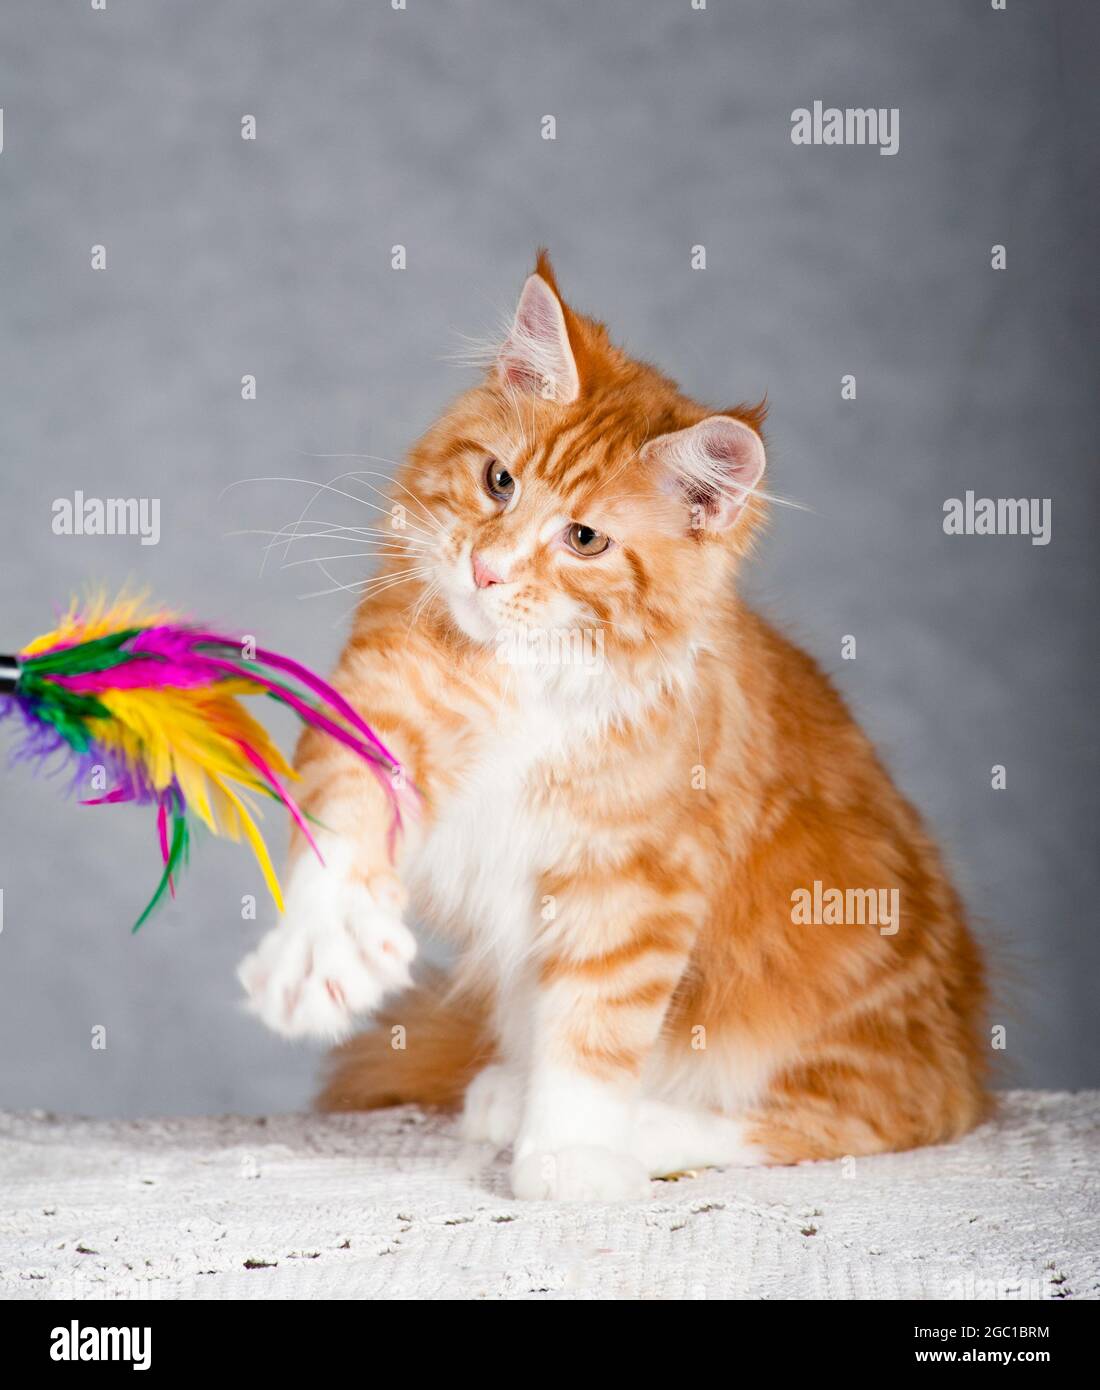 Red fur maine coon cat playing with toy, studio shot Stock Photo